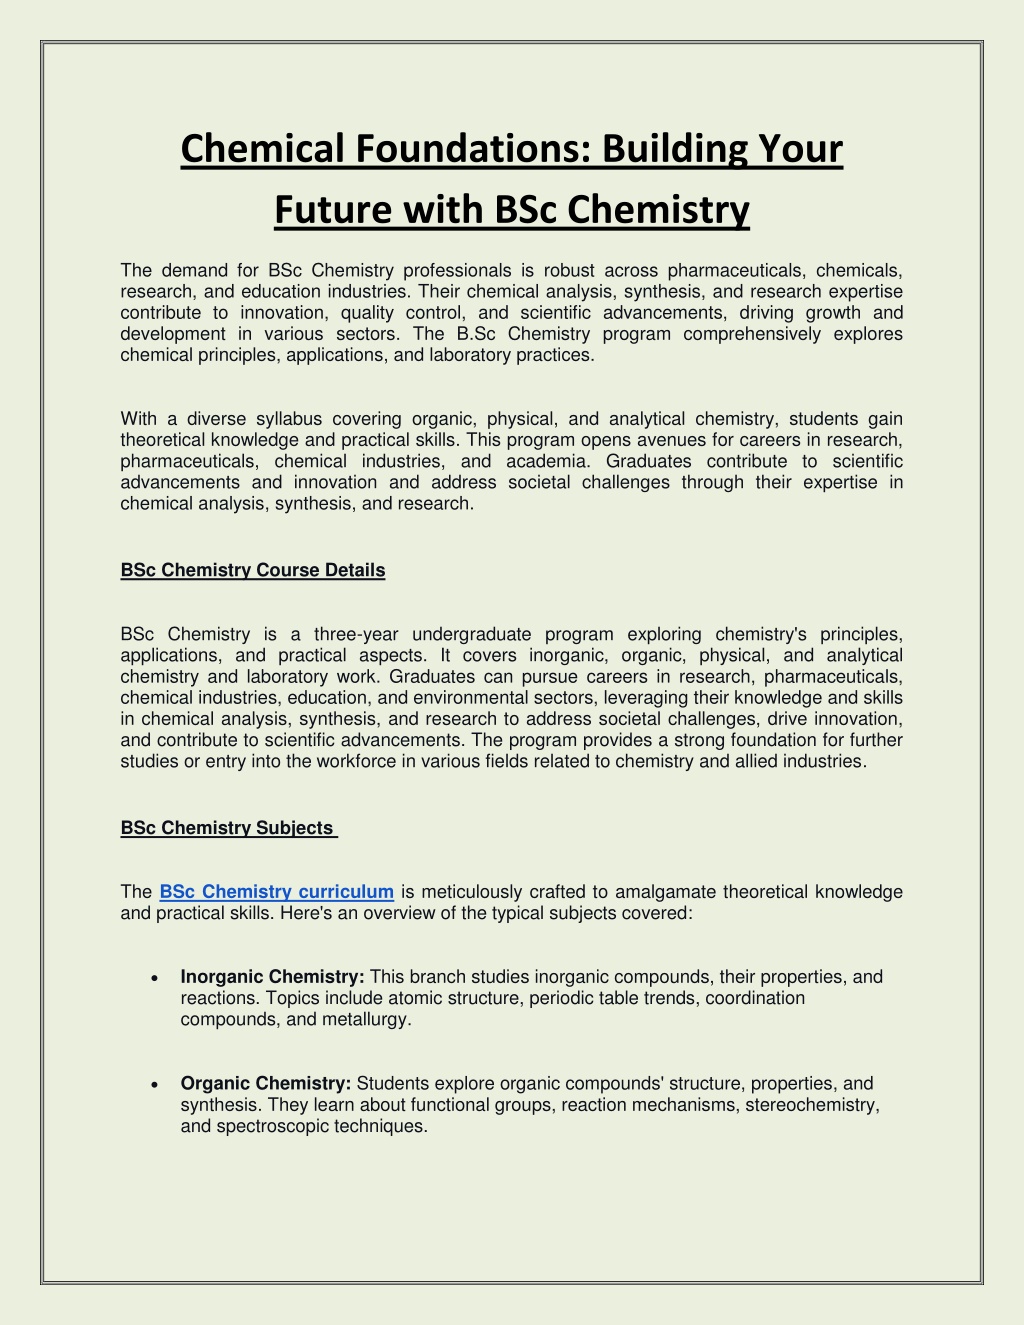 PPT - Chemical Foundations: Building Your Future with BSc Chemistry ...